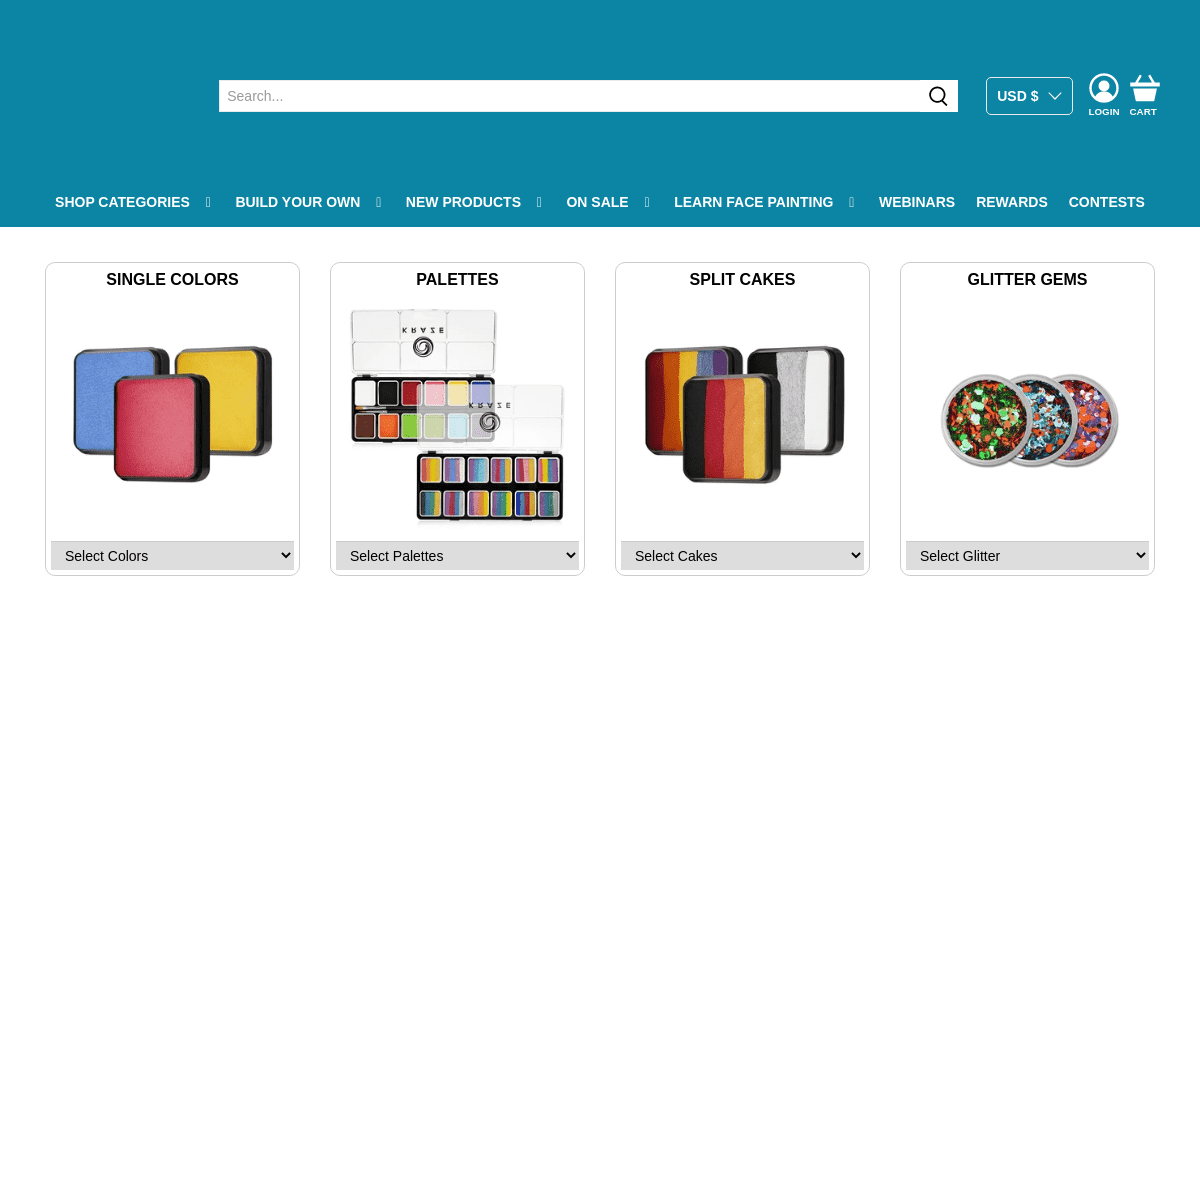 A complete backup of https://facepaint.com